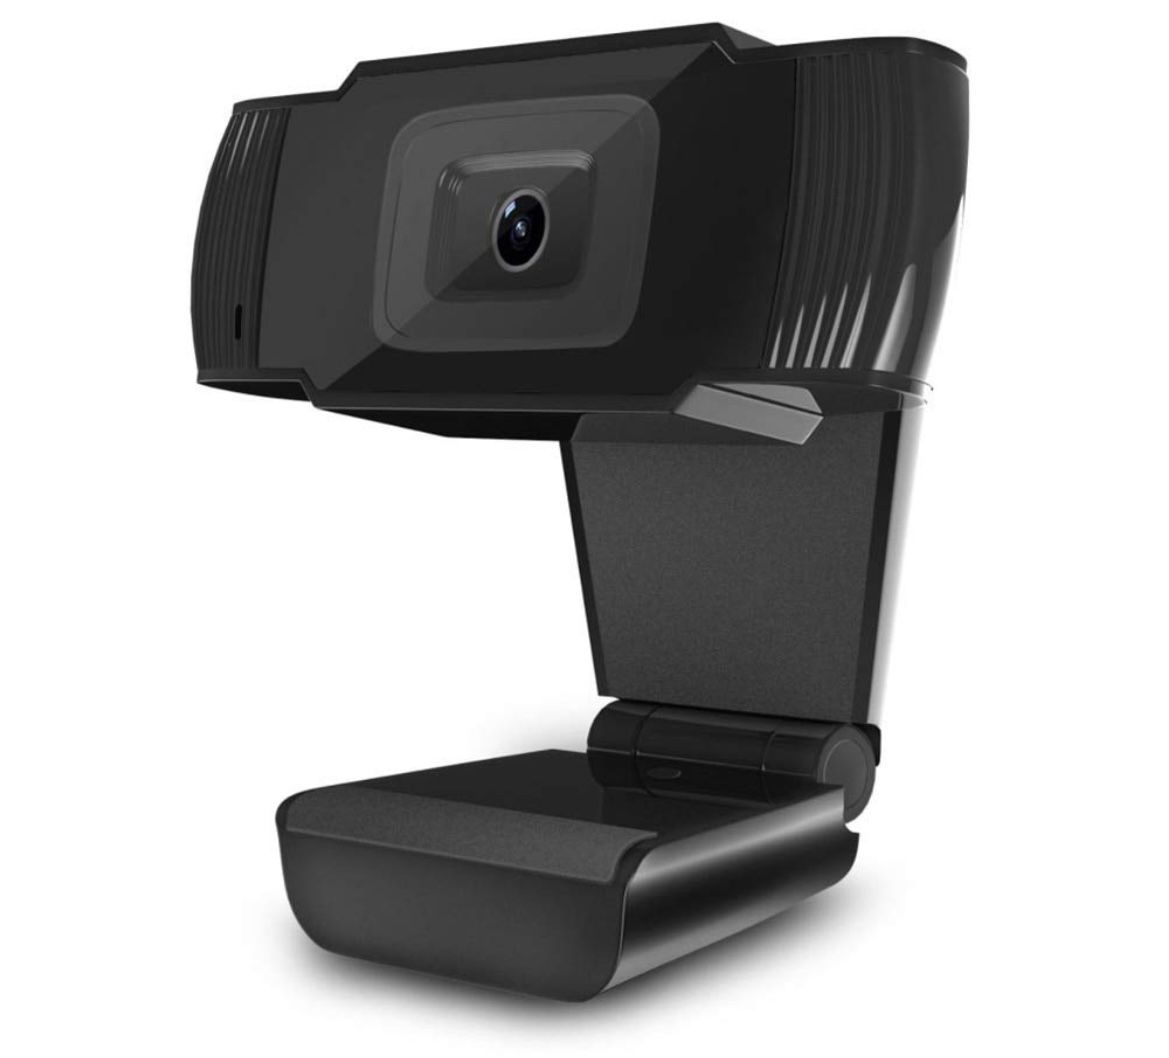 Web Camera Full HD 1080P Compatible with windows 10, 8, 7, XP and MAC OS X.